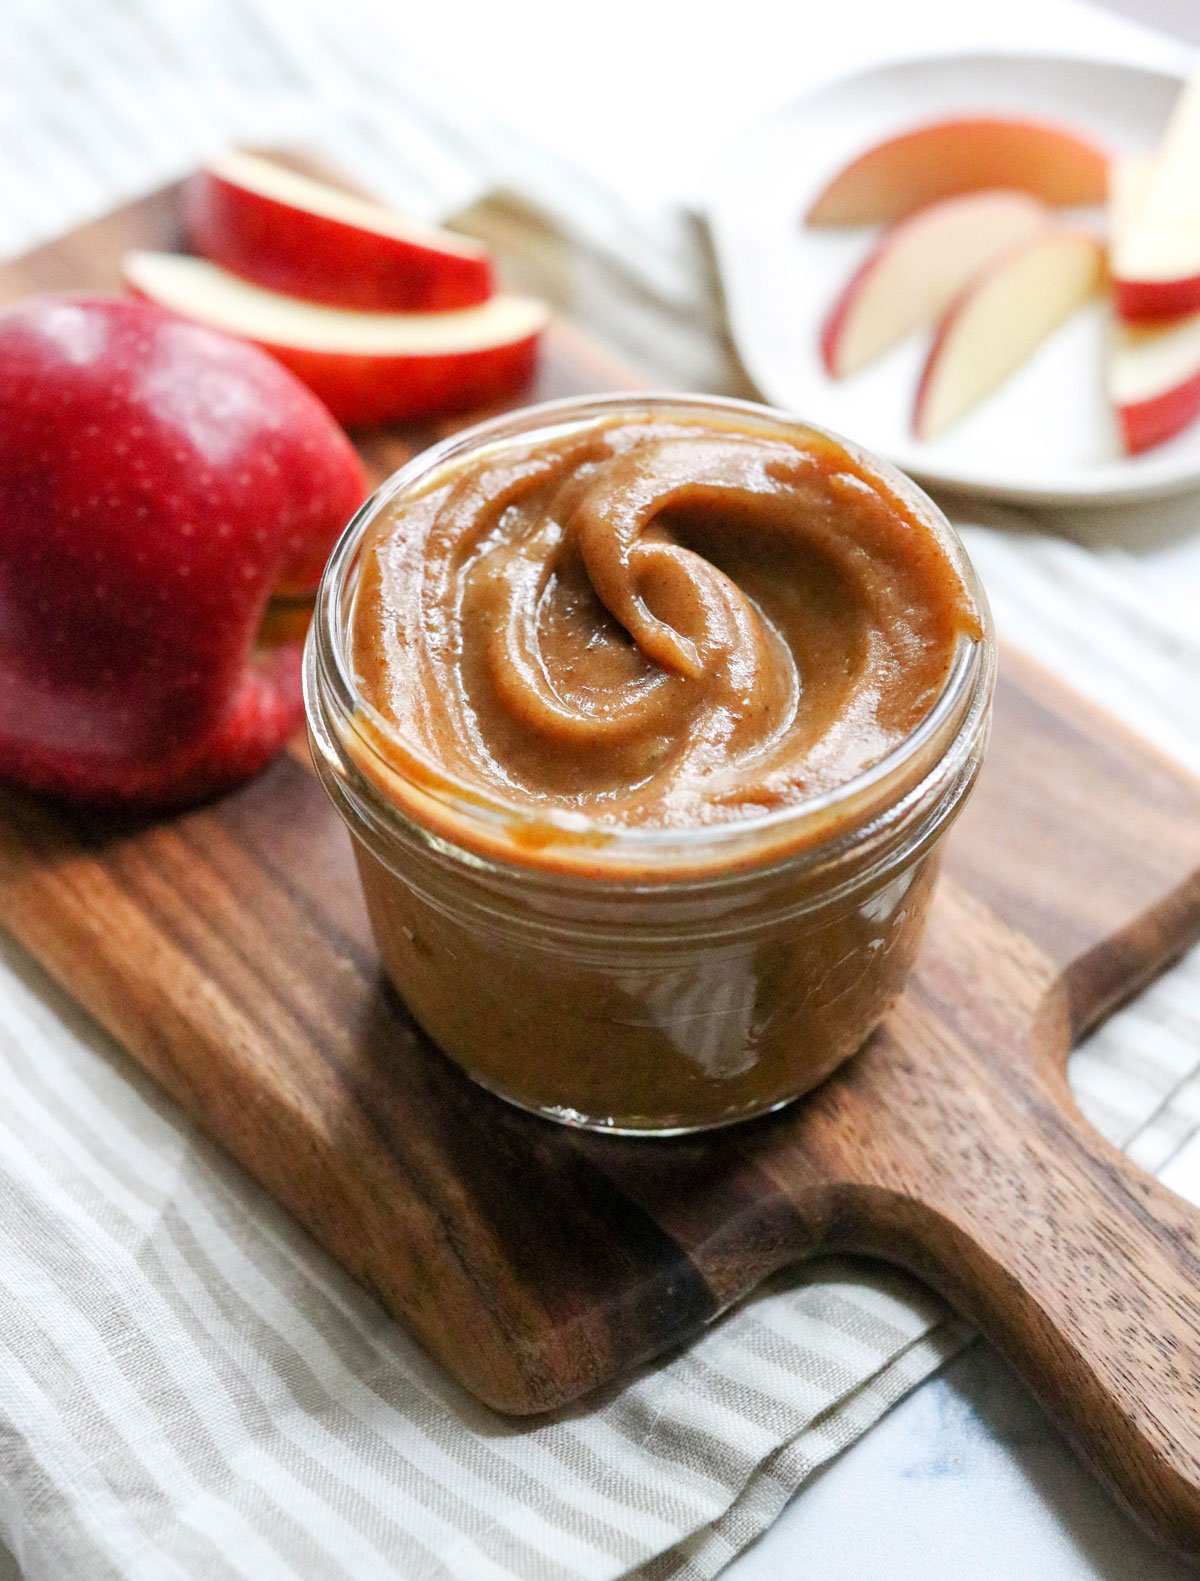 Date caramel in a jar served with apples